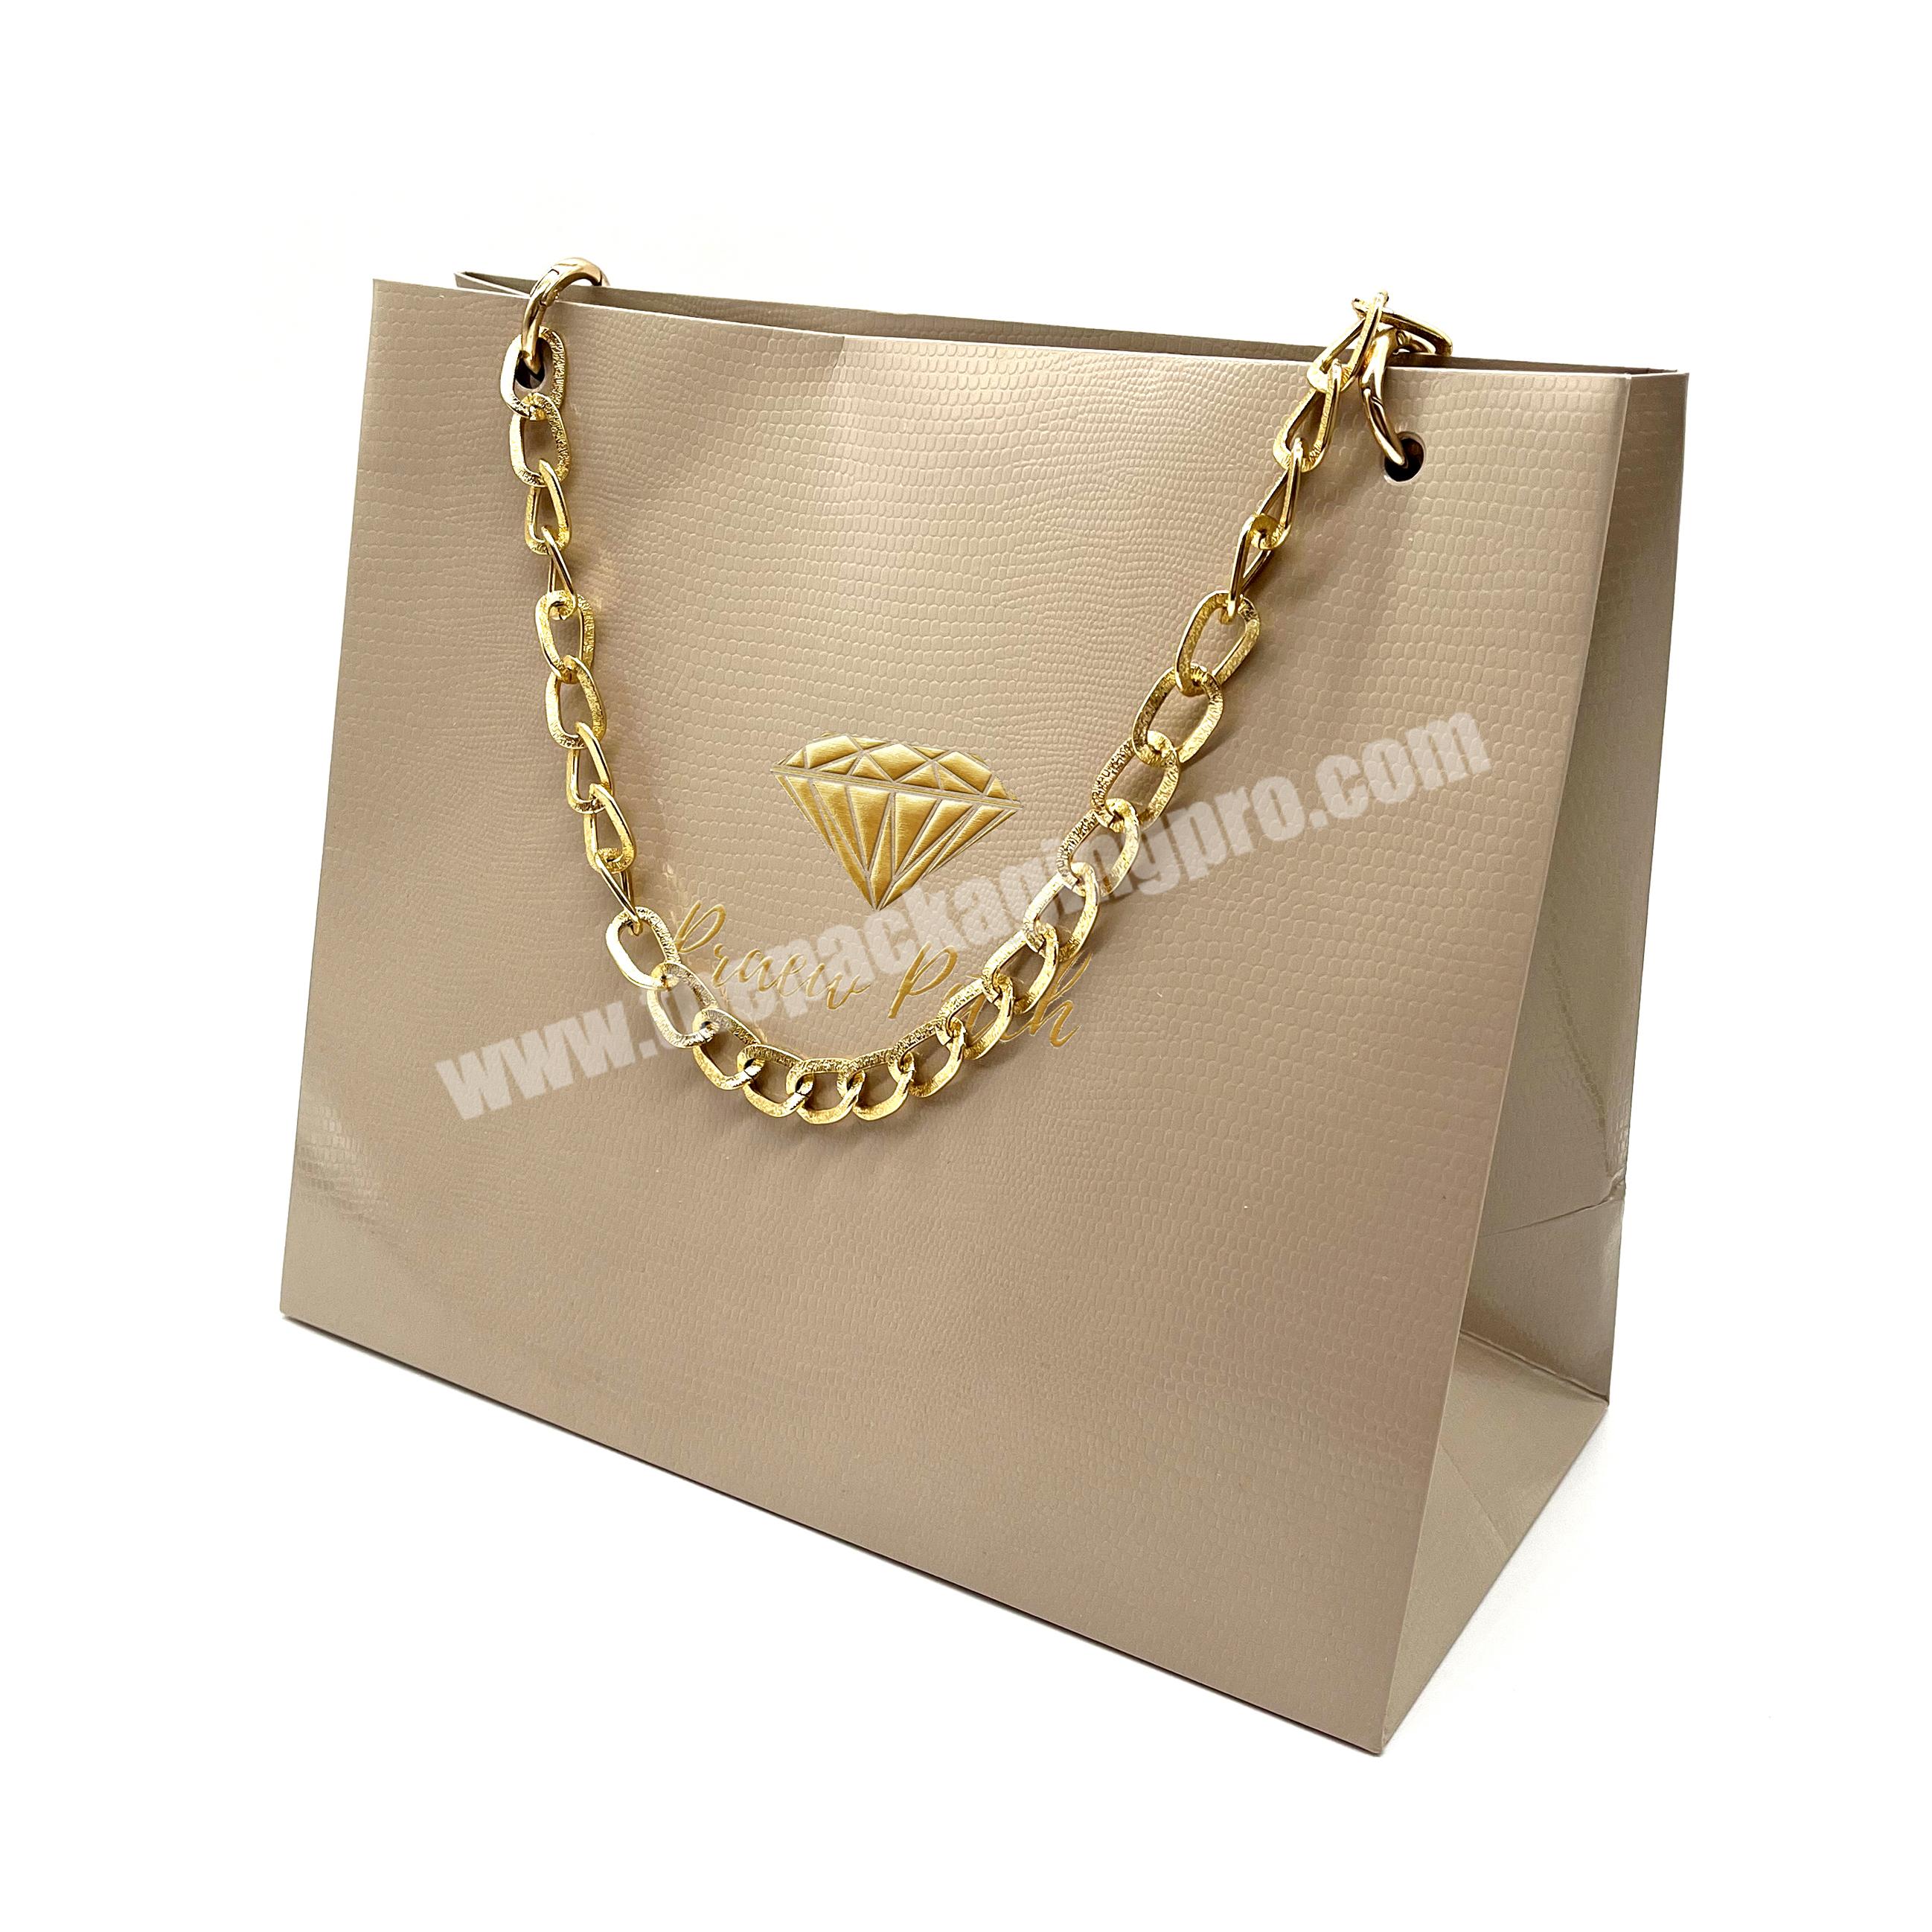 Custom Luxury tote Gift Paper Bags With Metal Chain Handles, Textured paper bag with logo